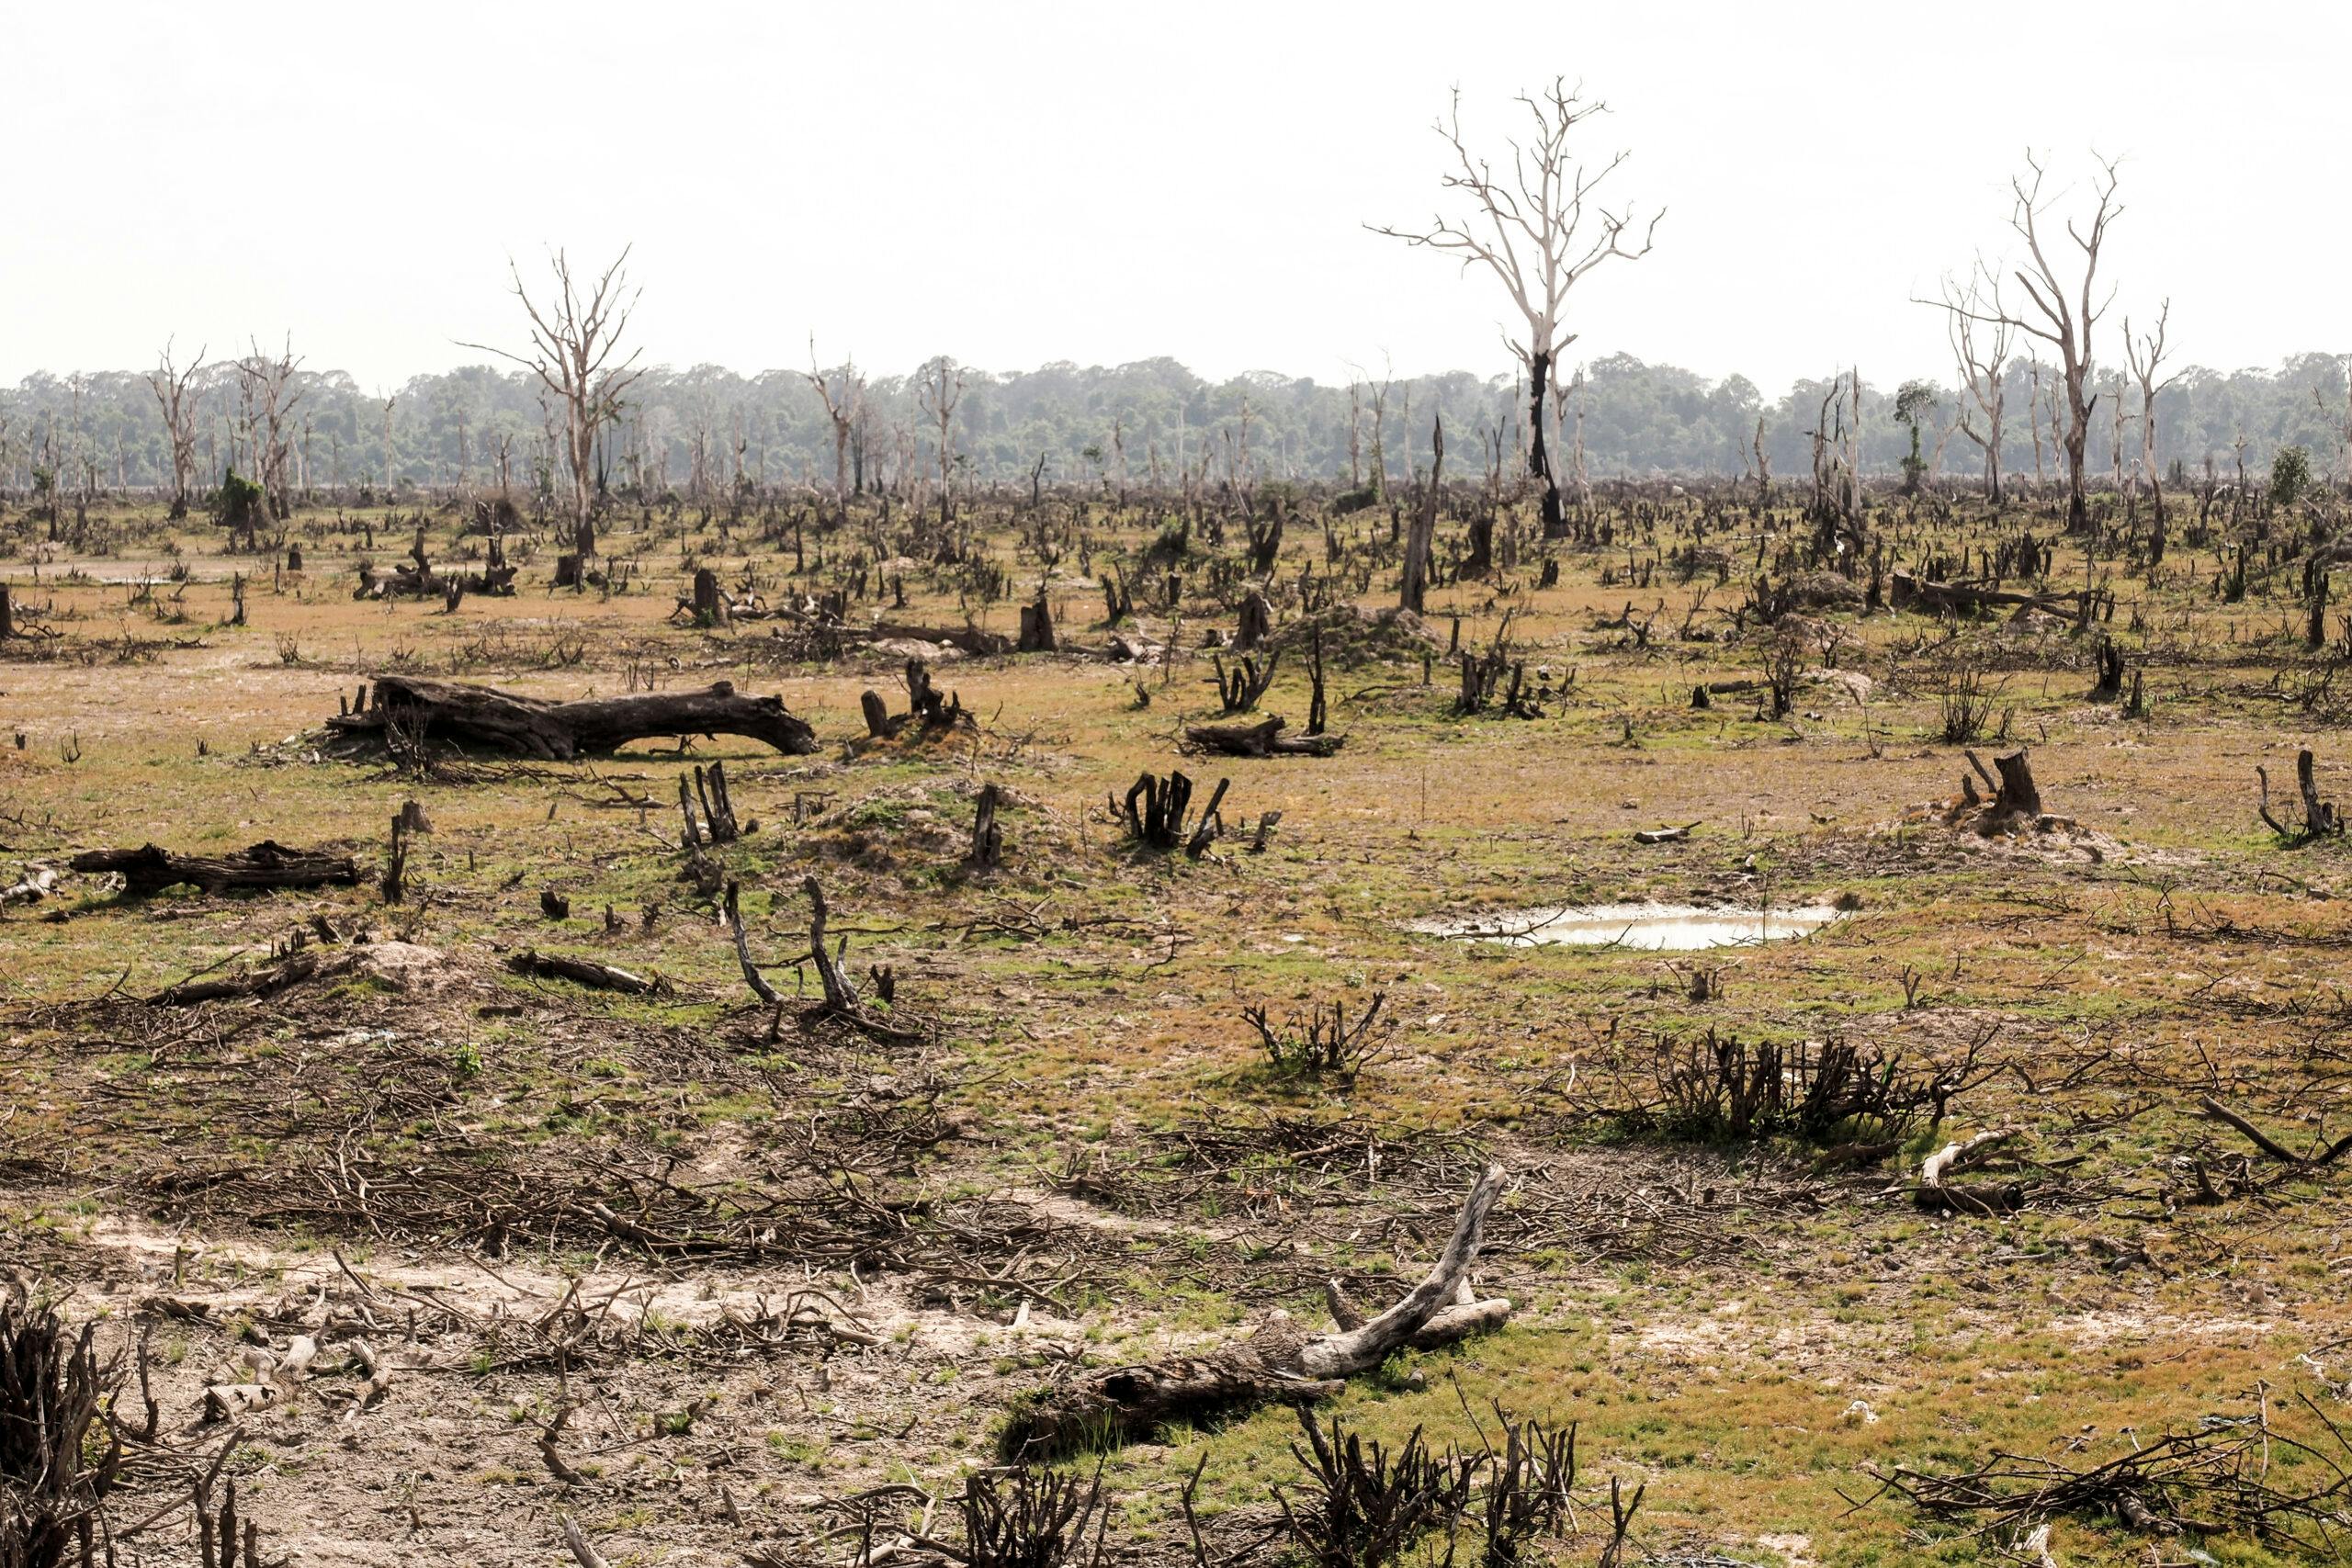 Deforestation,,Cutting,Down,Trees,For,Human,Uses,Causes,Environmental,Effects